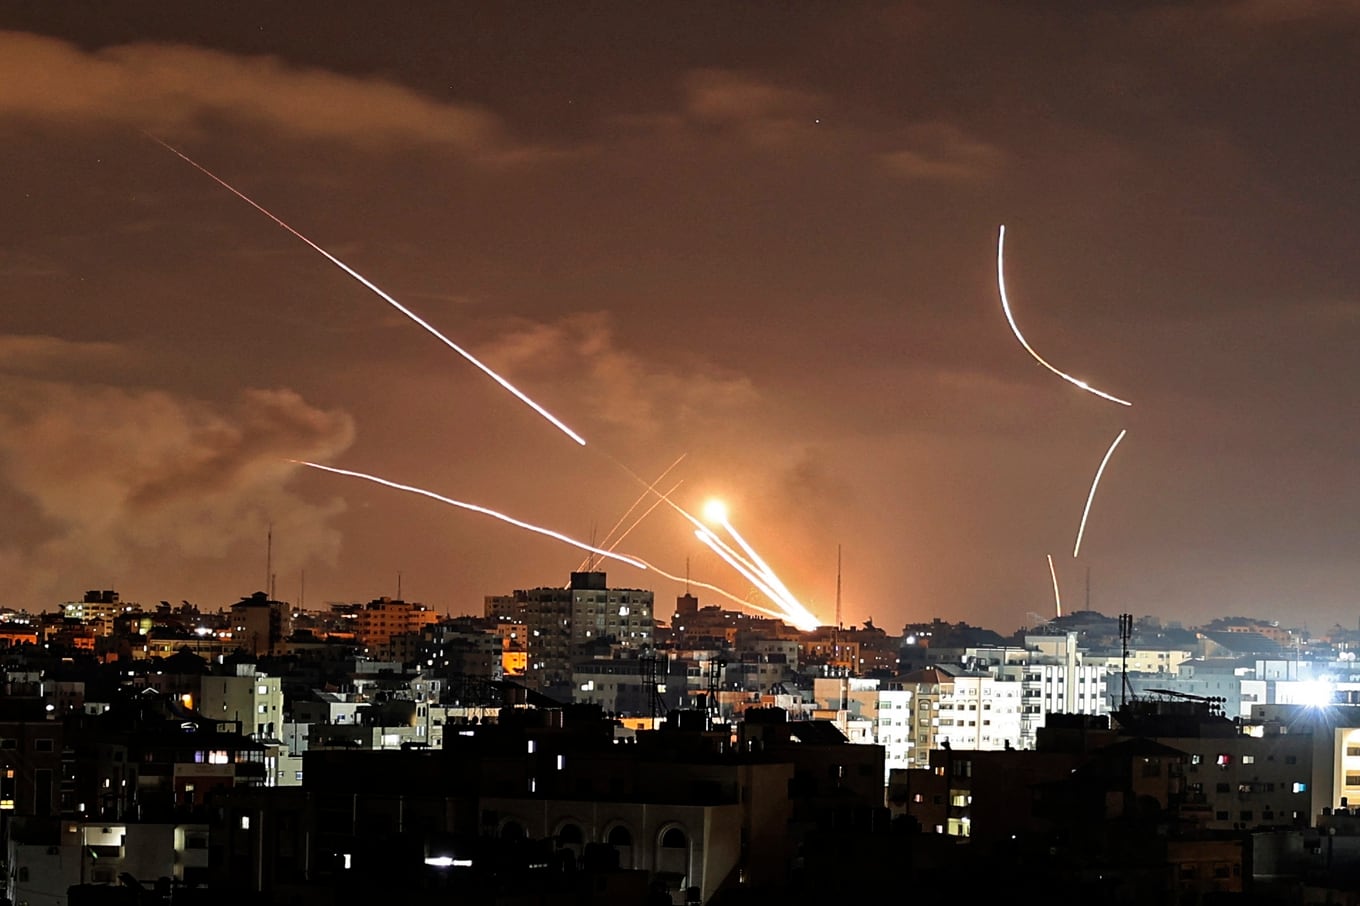 Rockets are launched from Gaza City, controlled by the Palestinian Hamas movement, towards Israel on May 12, 2021, amid the most intense Israeli-Palestinian hostilities in seven years. (Photo by MAHMUD HAMS / AFP)